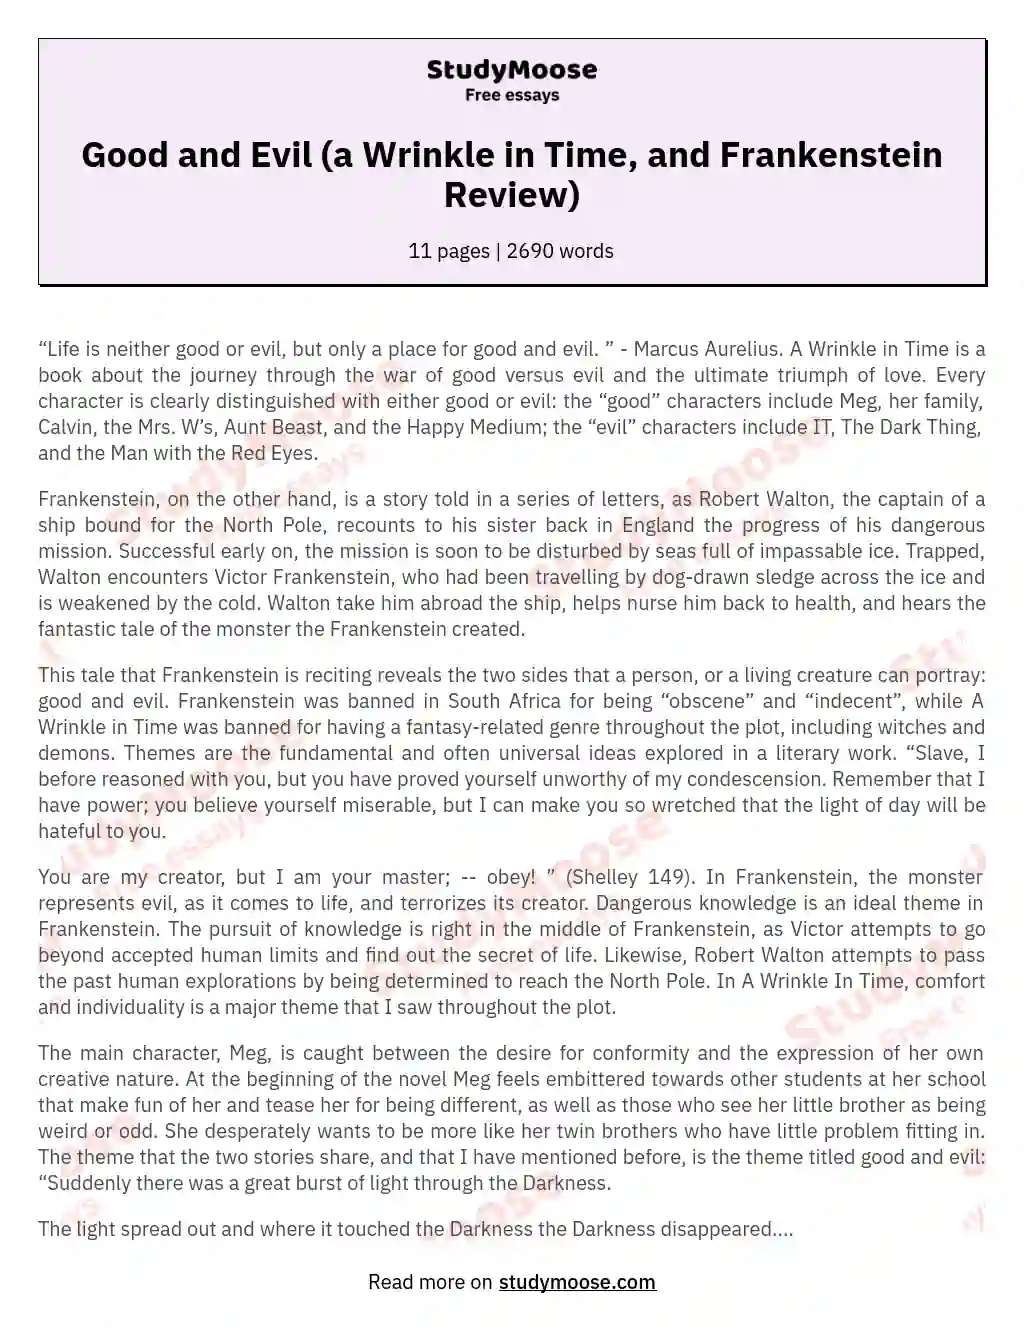 Good and Evil (a Wrinkle in Time, and Frankenstein Review) essay